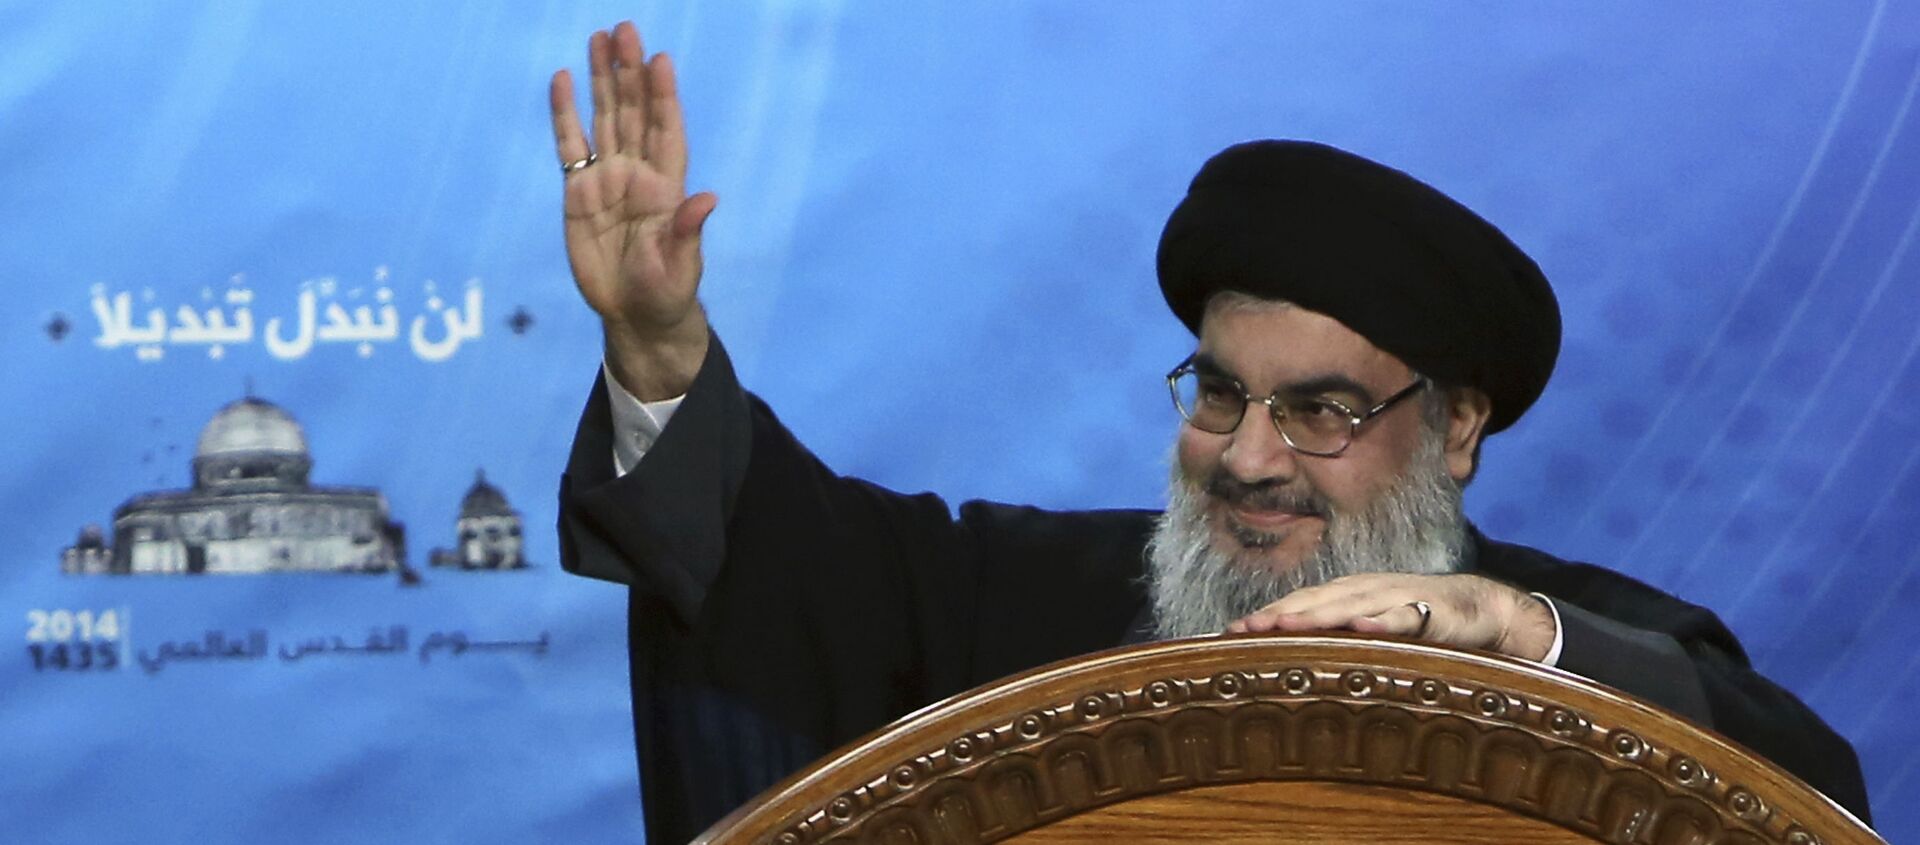  In this July 25, 2014, file photo, Hezbollah leader Sheik Hassan Nasrallah speaks during a rally to mark Jerusalem Day or Al-Quds day, in the southern suburb of Beirut, Lebanon. On Sunday, Nov. 5, 2017 Nasrallah, in a televised speech, said the country's prime minister Saad Hariri was forced by Saudi Arabia to resign - Sputnik International, 1920, 14.02.2021